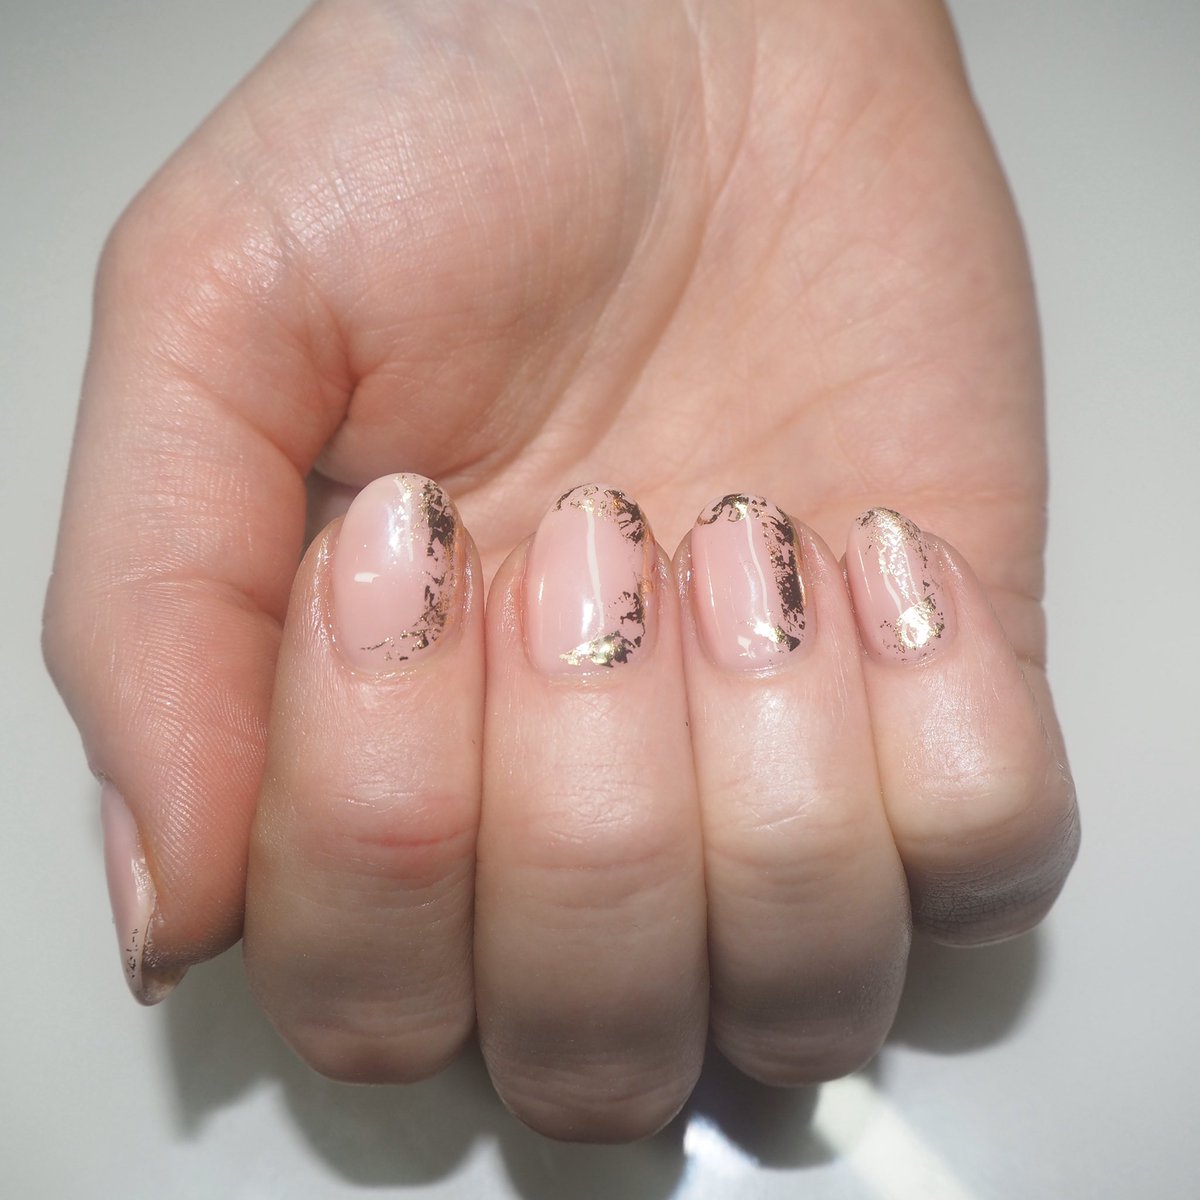 Gorgeous nude nails with gold foils 💕 #thegelbottle #goldfoilnails #foilnails #nails #huddersfield #nailshuddersfield #salon #beauty #lashes #ohsogorgeous #colnevalley